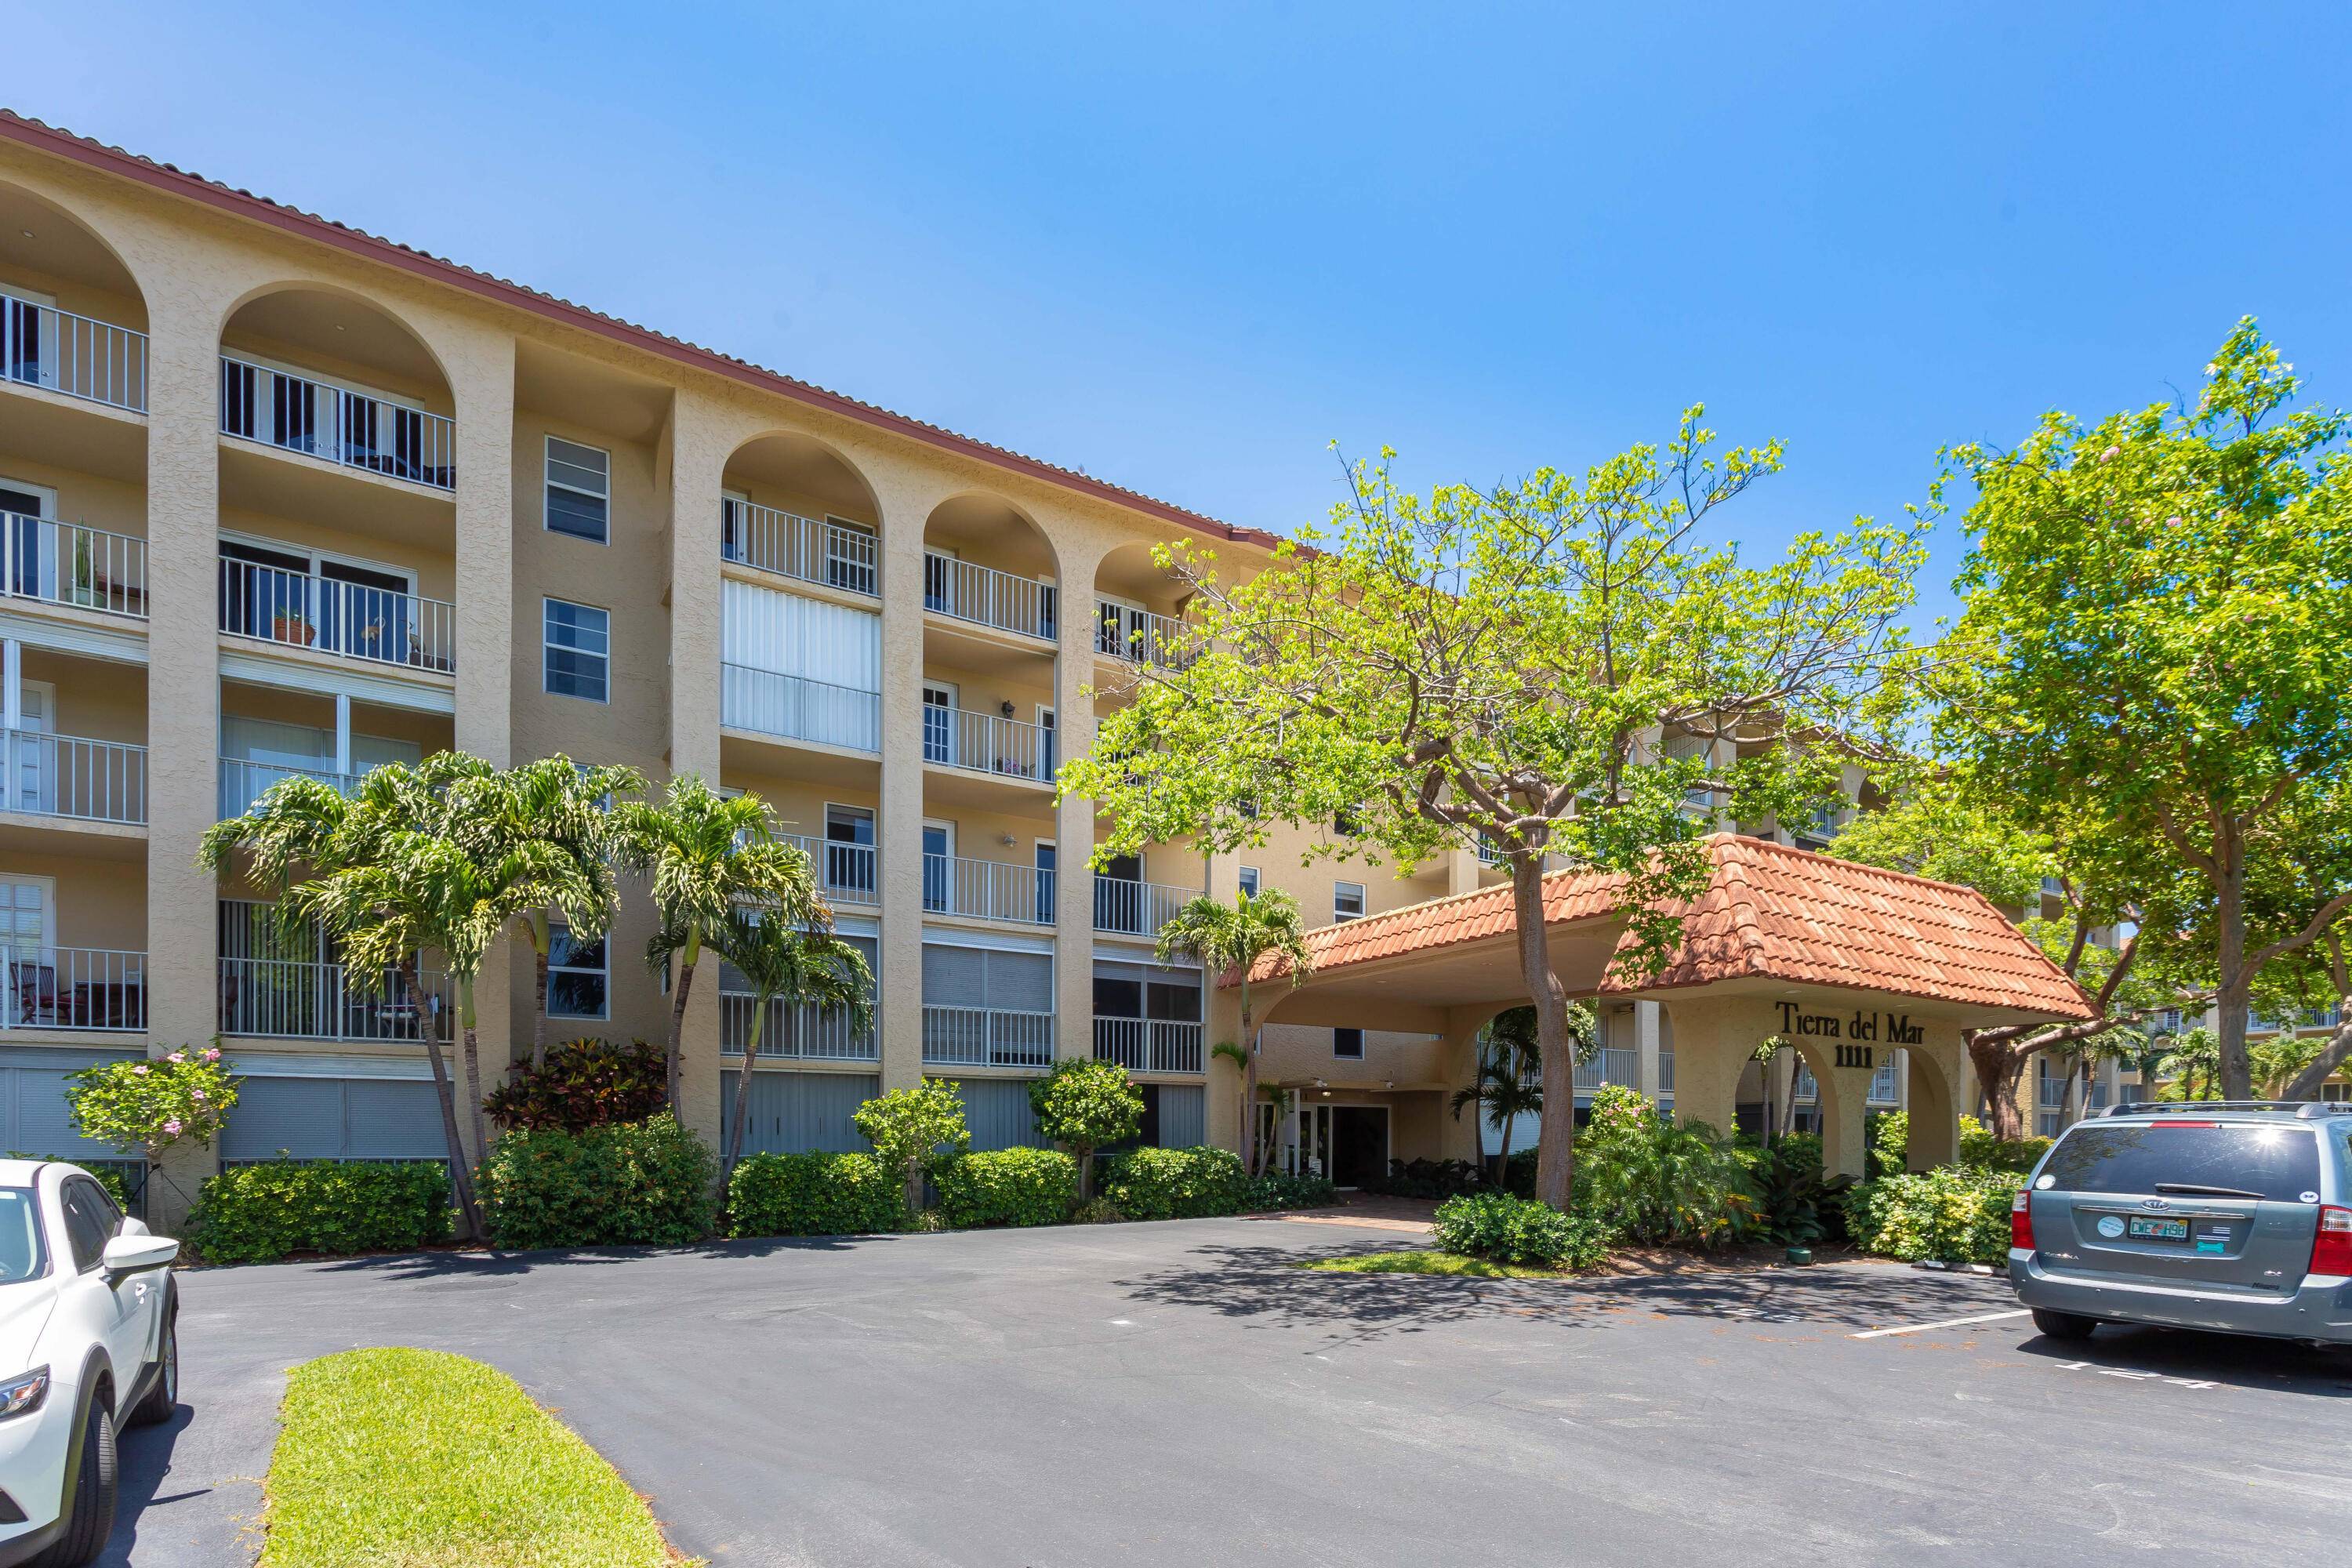 LOCATION, LOCATION ! ENJOY THE BOCA LIFESTYLE IN THIS BEAUTIFUL 2 BEDROOM, 2 BATH APARTMENT WHICH IS DIRECTLY ACROSS THE STREET FROM THE BEACH AND BOCA INLET.